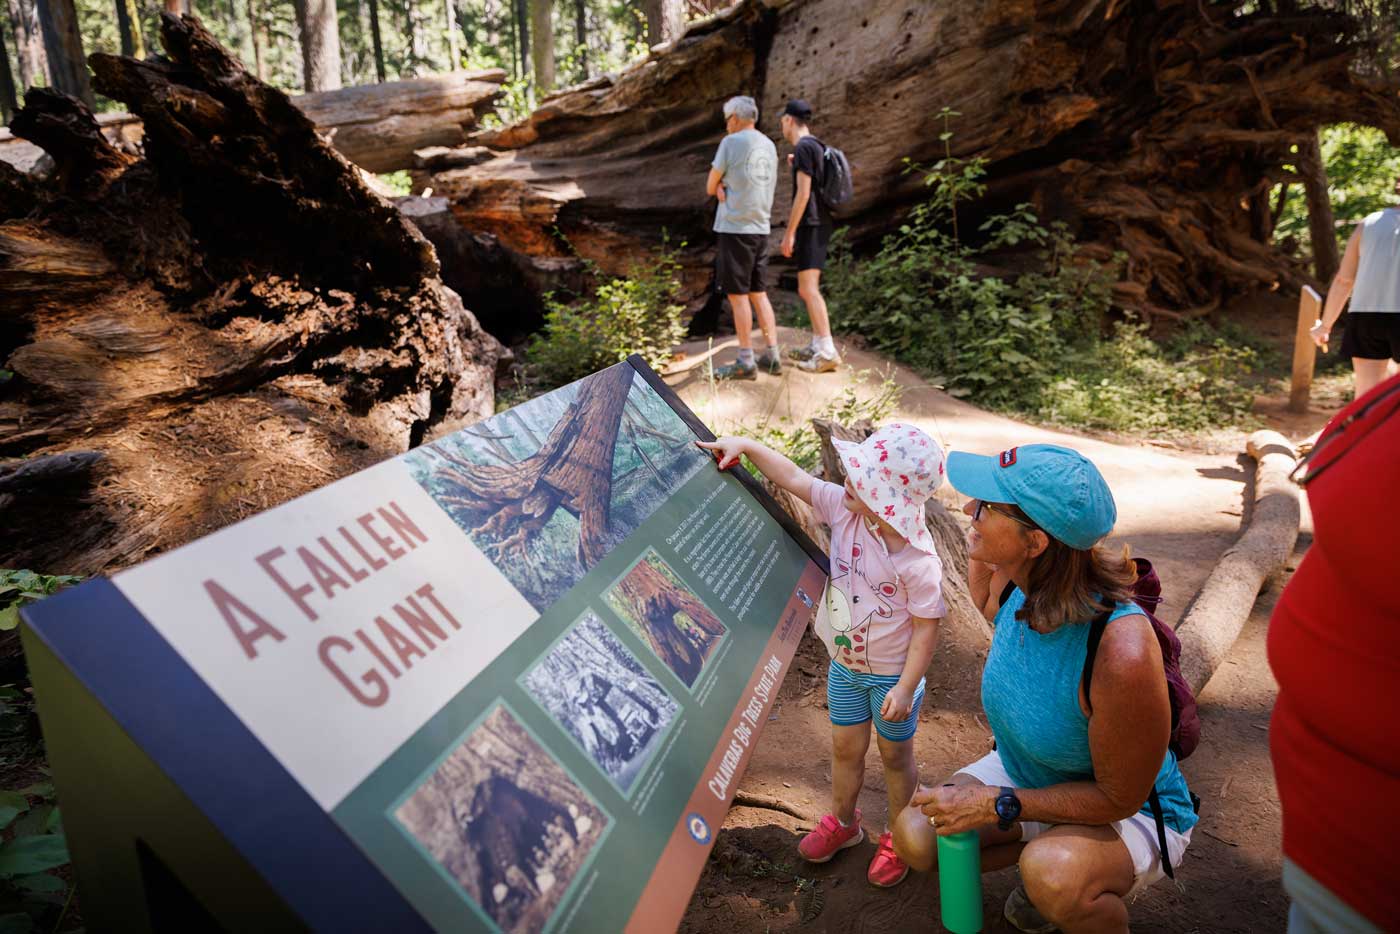 A woman and a little girl reading an interpretive panel about the Pioneer Cabin Tree